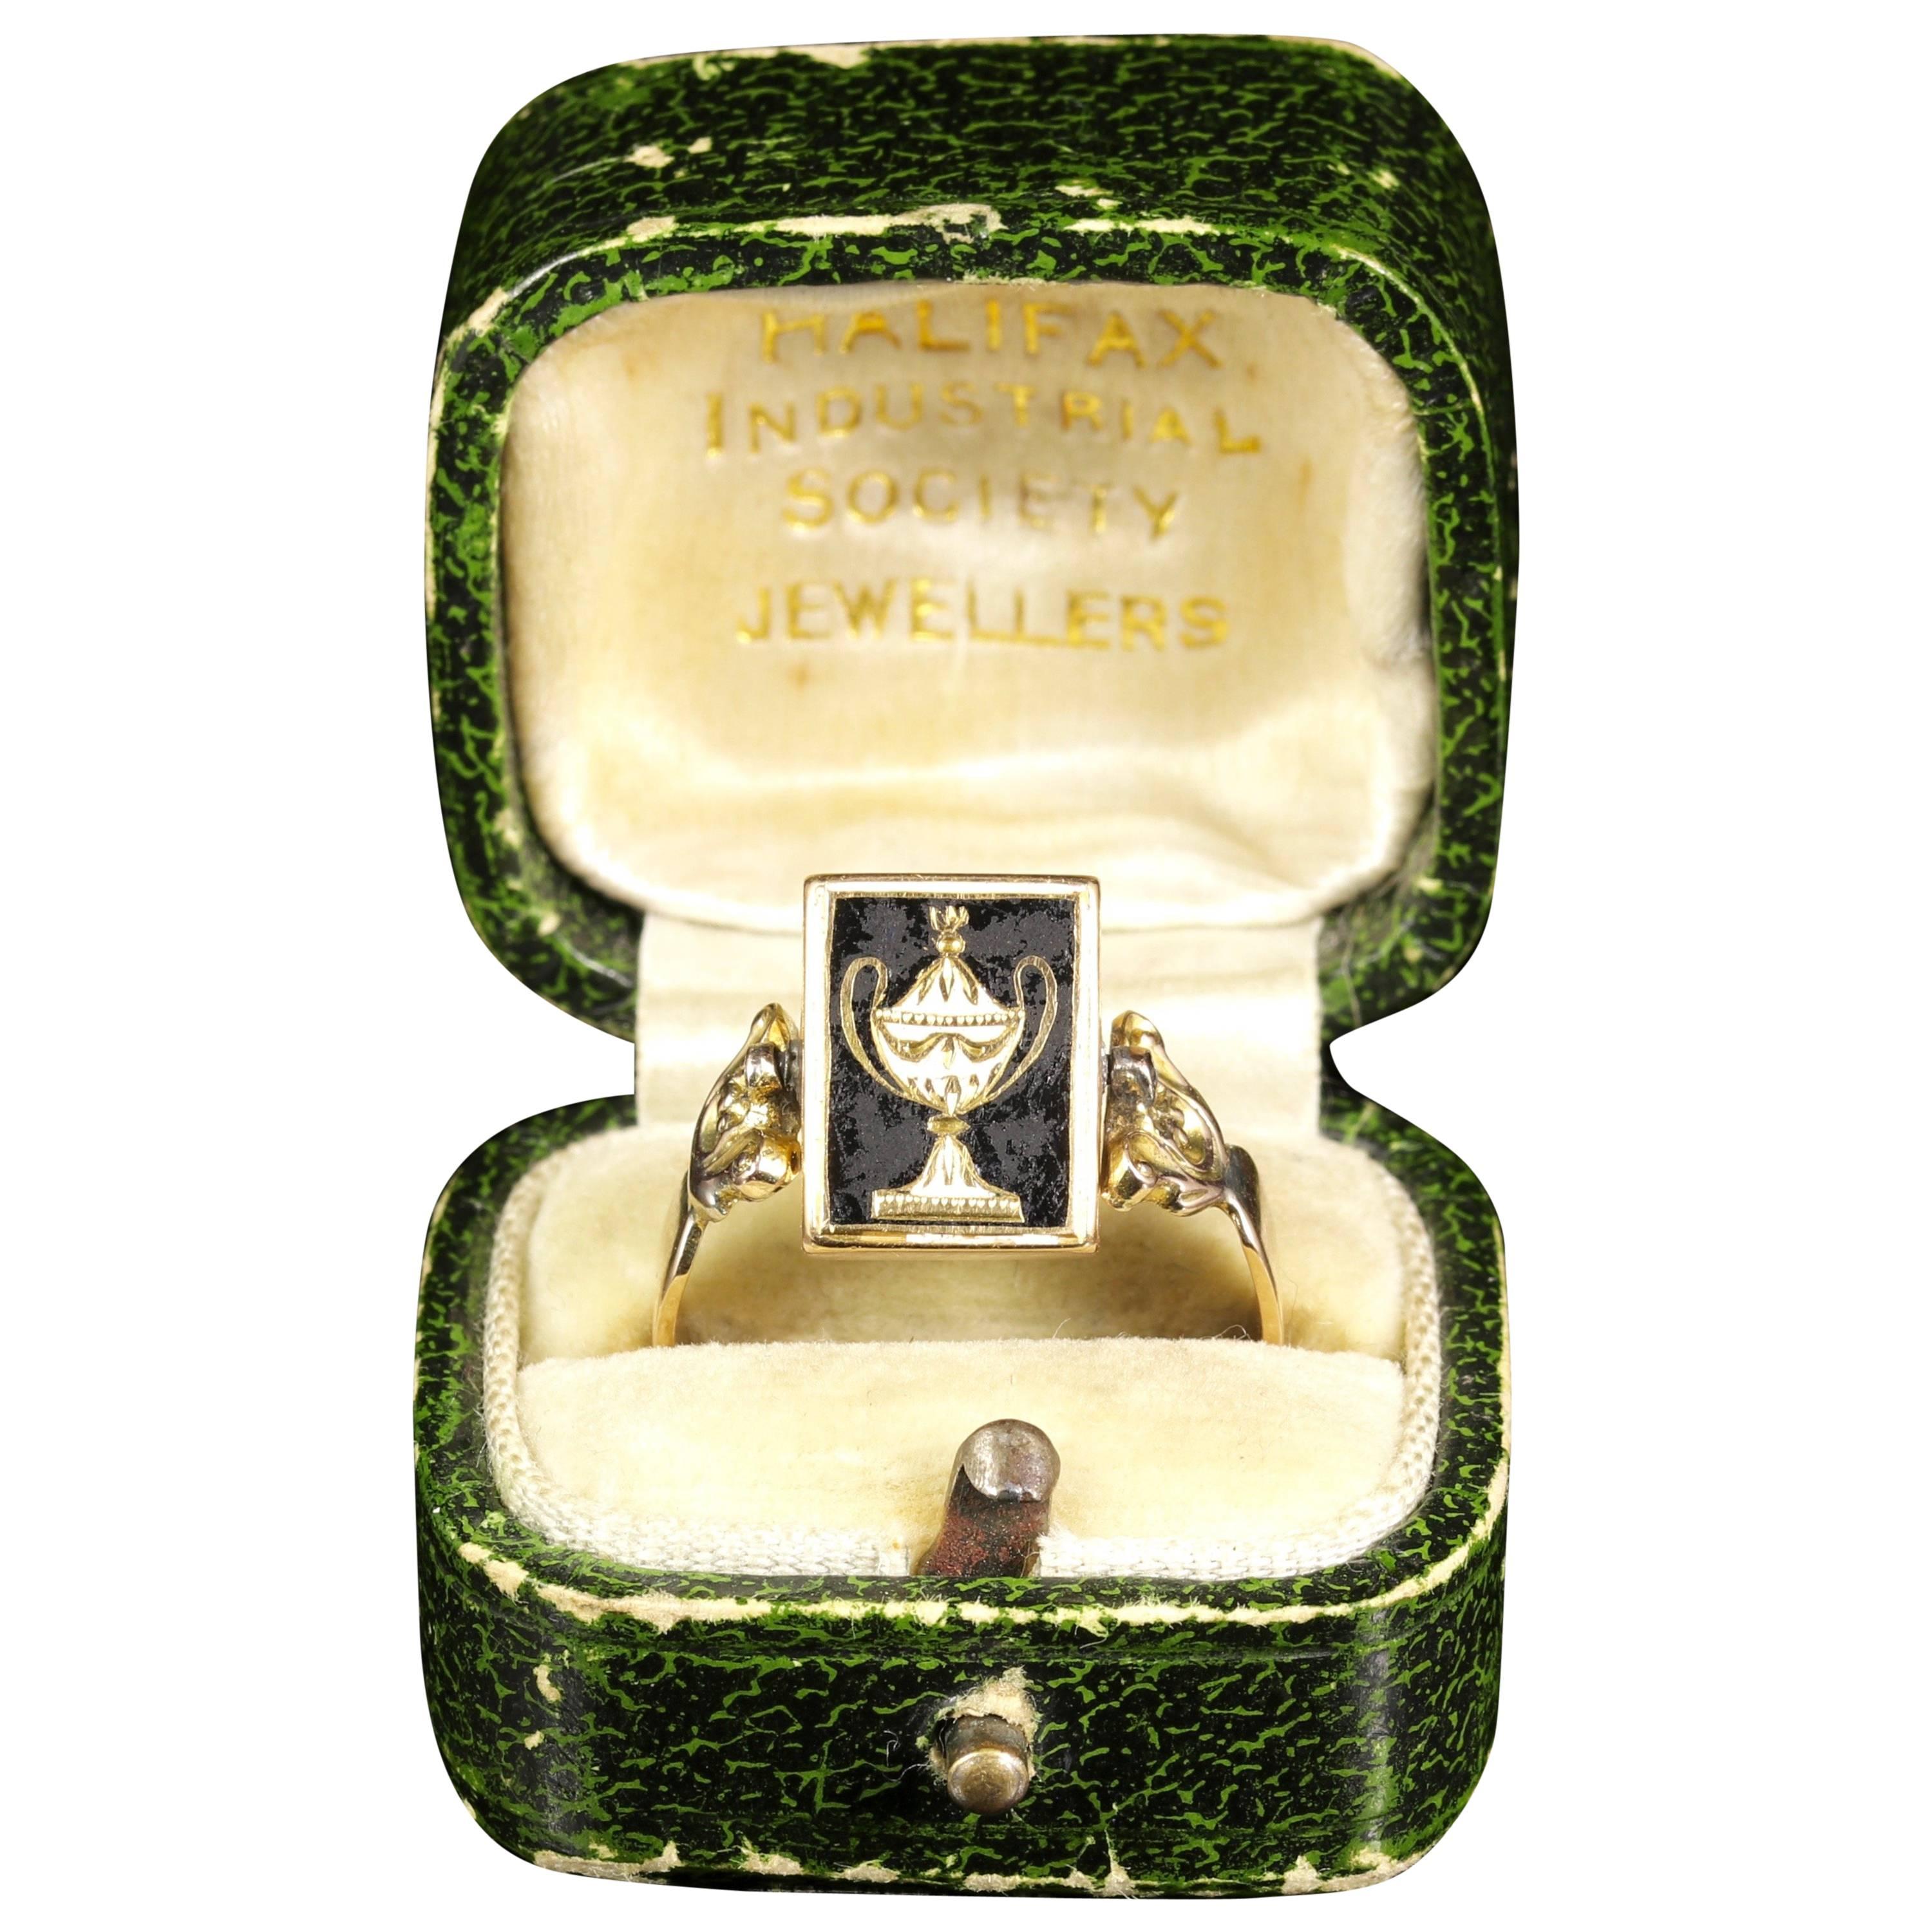 This is a genuine Georgian 18ct Yellow Gold mourning ring with original box.

On the front of the ring is a fabulous Enamel urn with intricate Gold details. 

The face of this stunning ring actually spins 360 degrees to reveal a hidden locket of